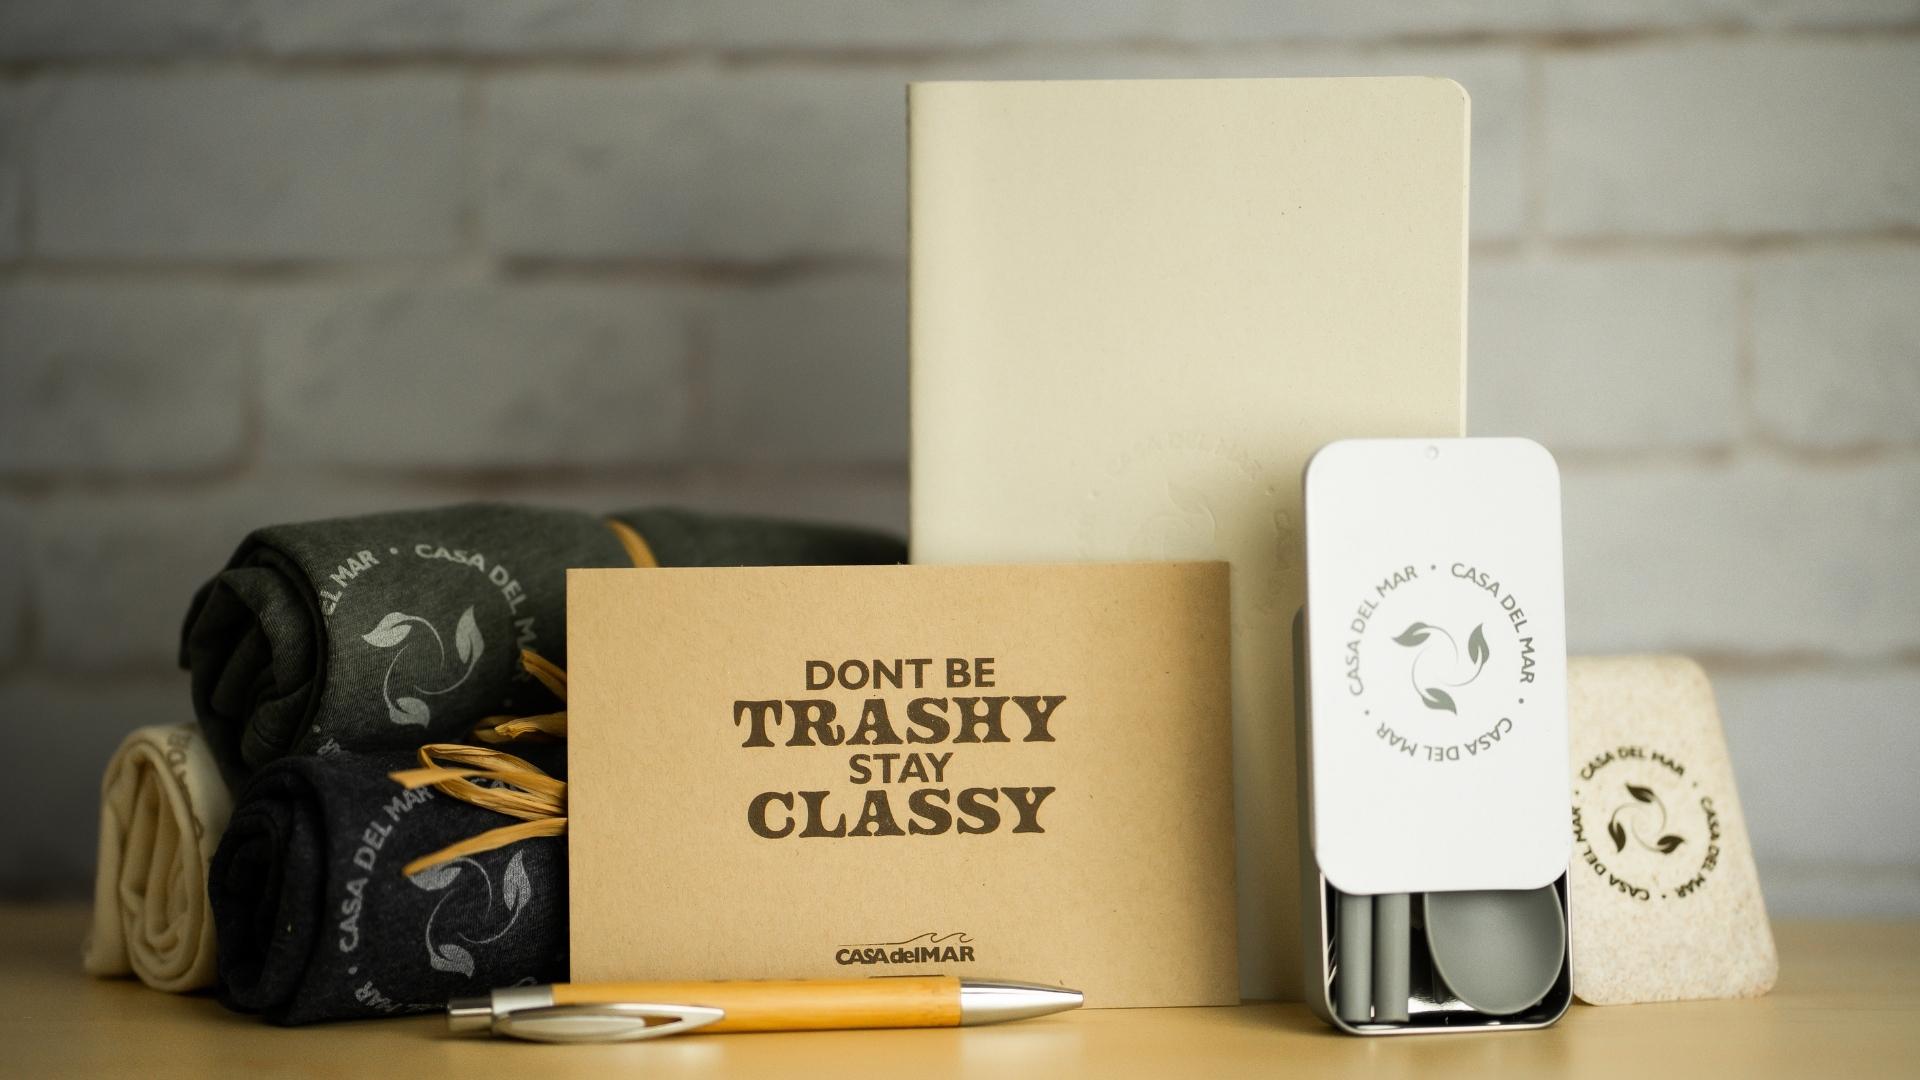 Corporate Gifts: Best Business Gift Ideas for Christmas | Crate & Barrel